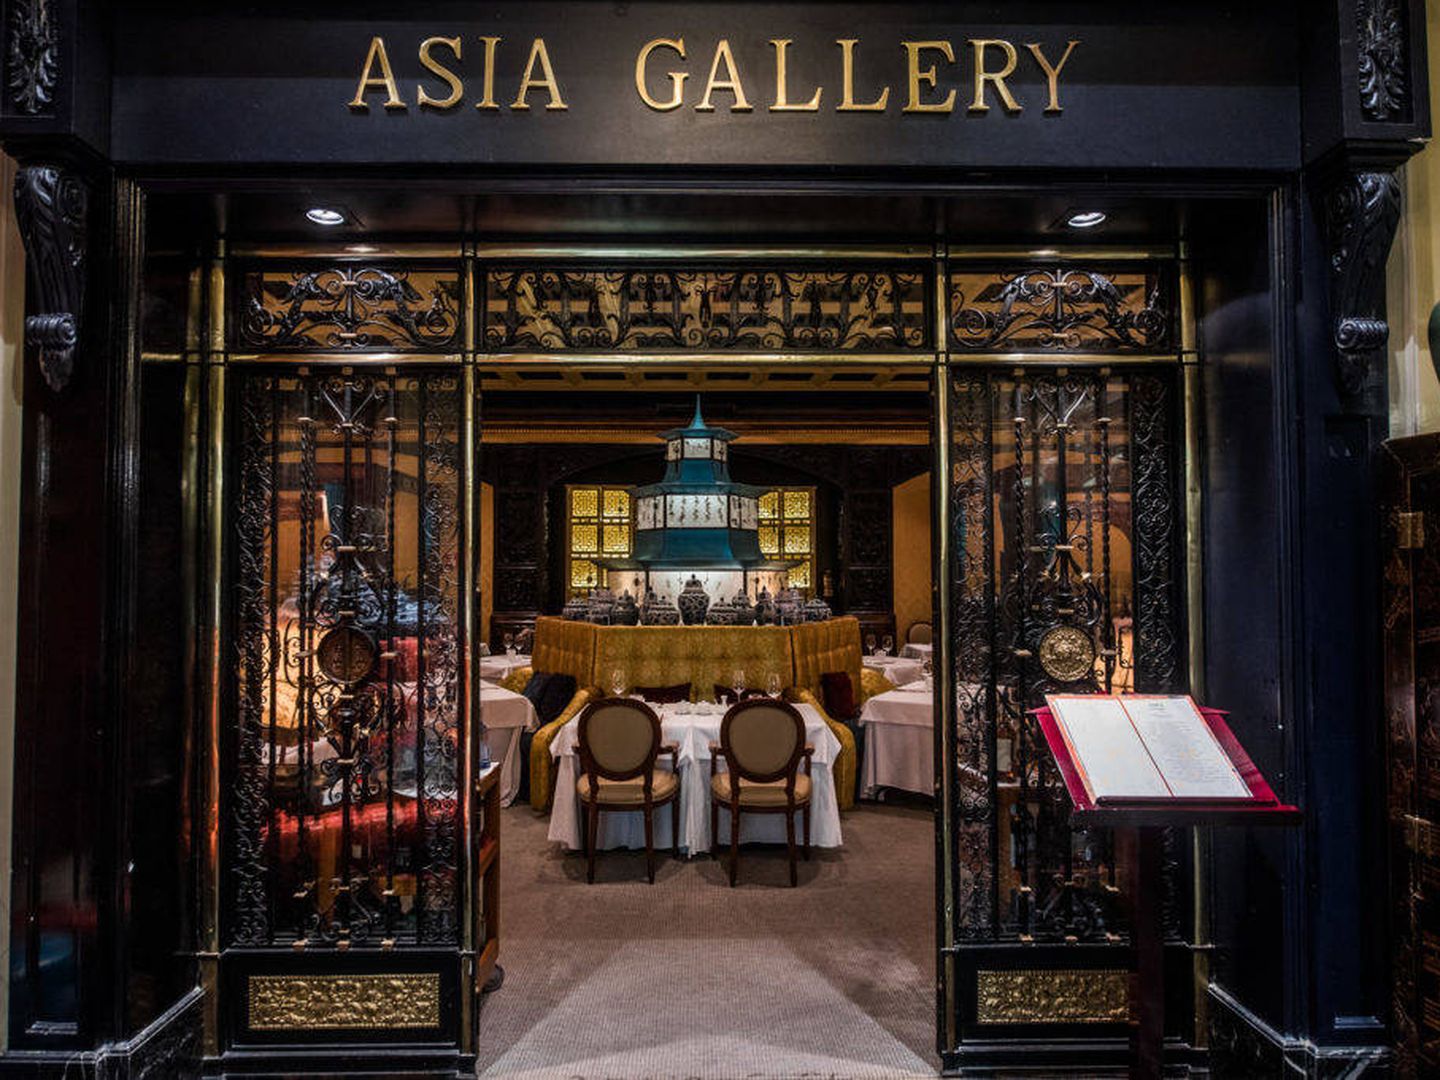 Asia Gallery.